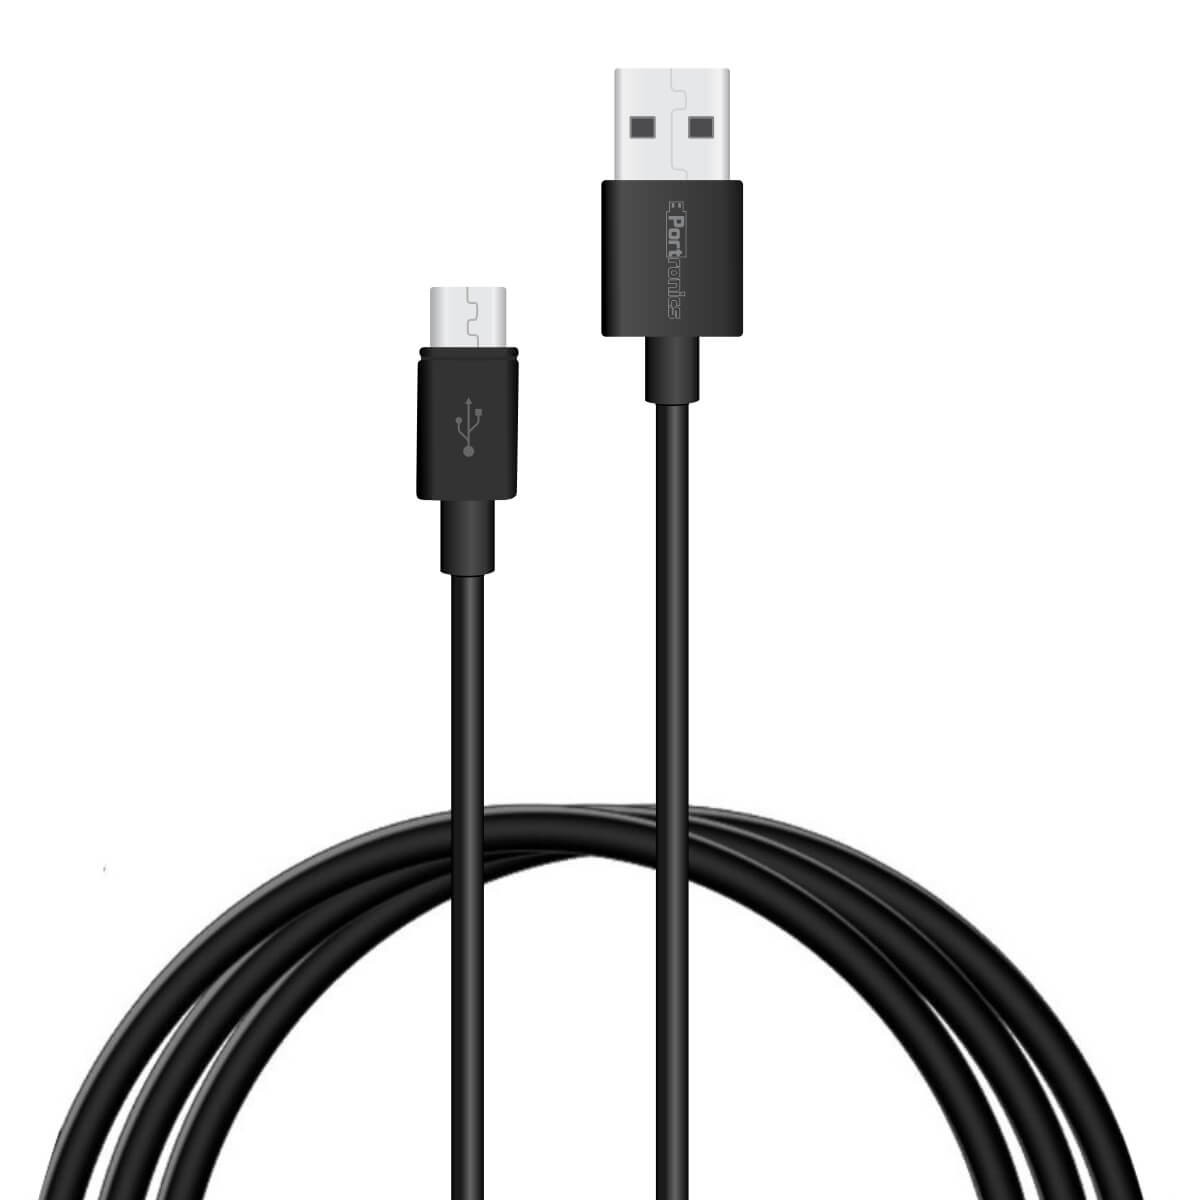 Portronics Konnect Core Plus 2M POR-1085 Fast Charging 3A Micro USB Cable for Android Phones (Black)